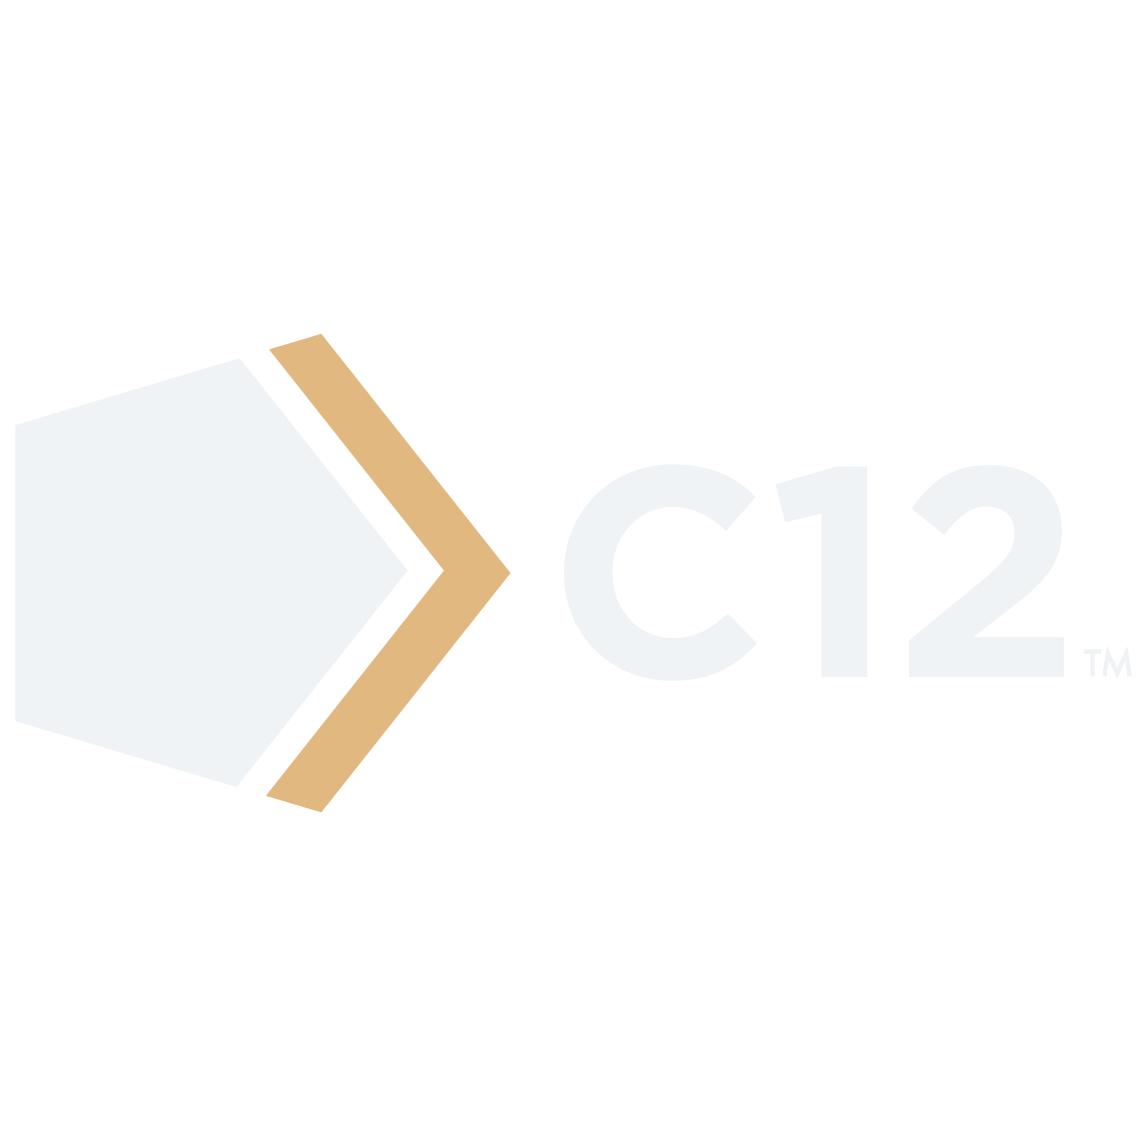 c12_new_logo.png